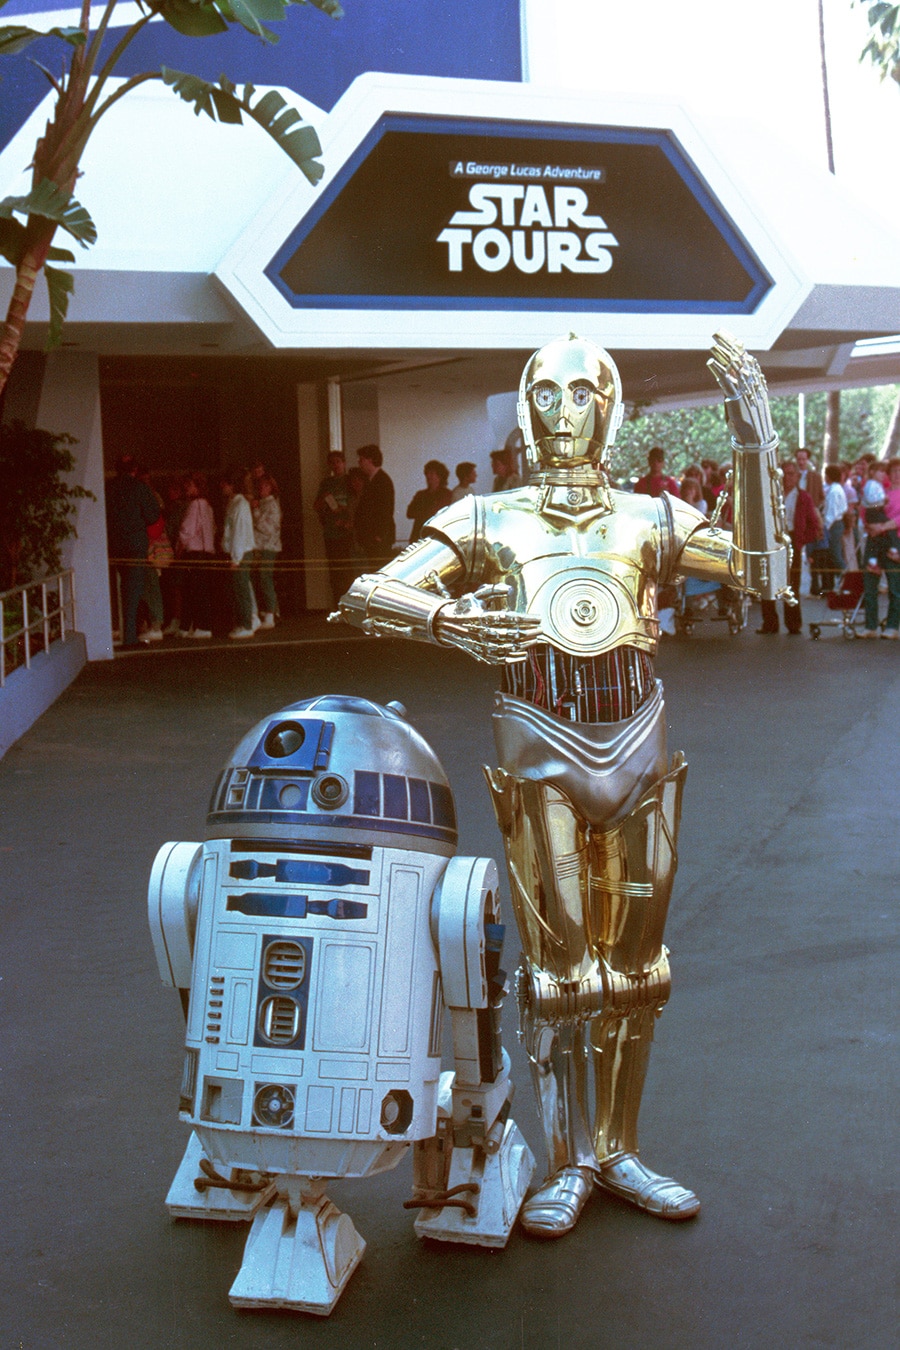 Star Tours 30 Years Attraction Poster Jumbo R2-D2 C-3PO Pin LE 1000 D23 Expo 